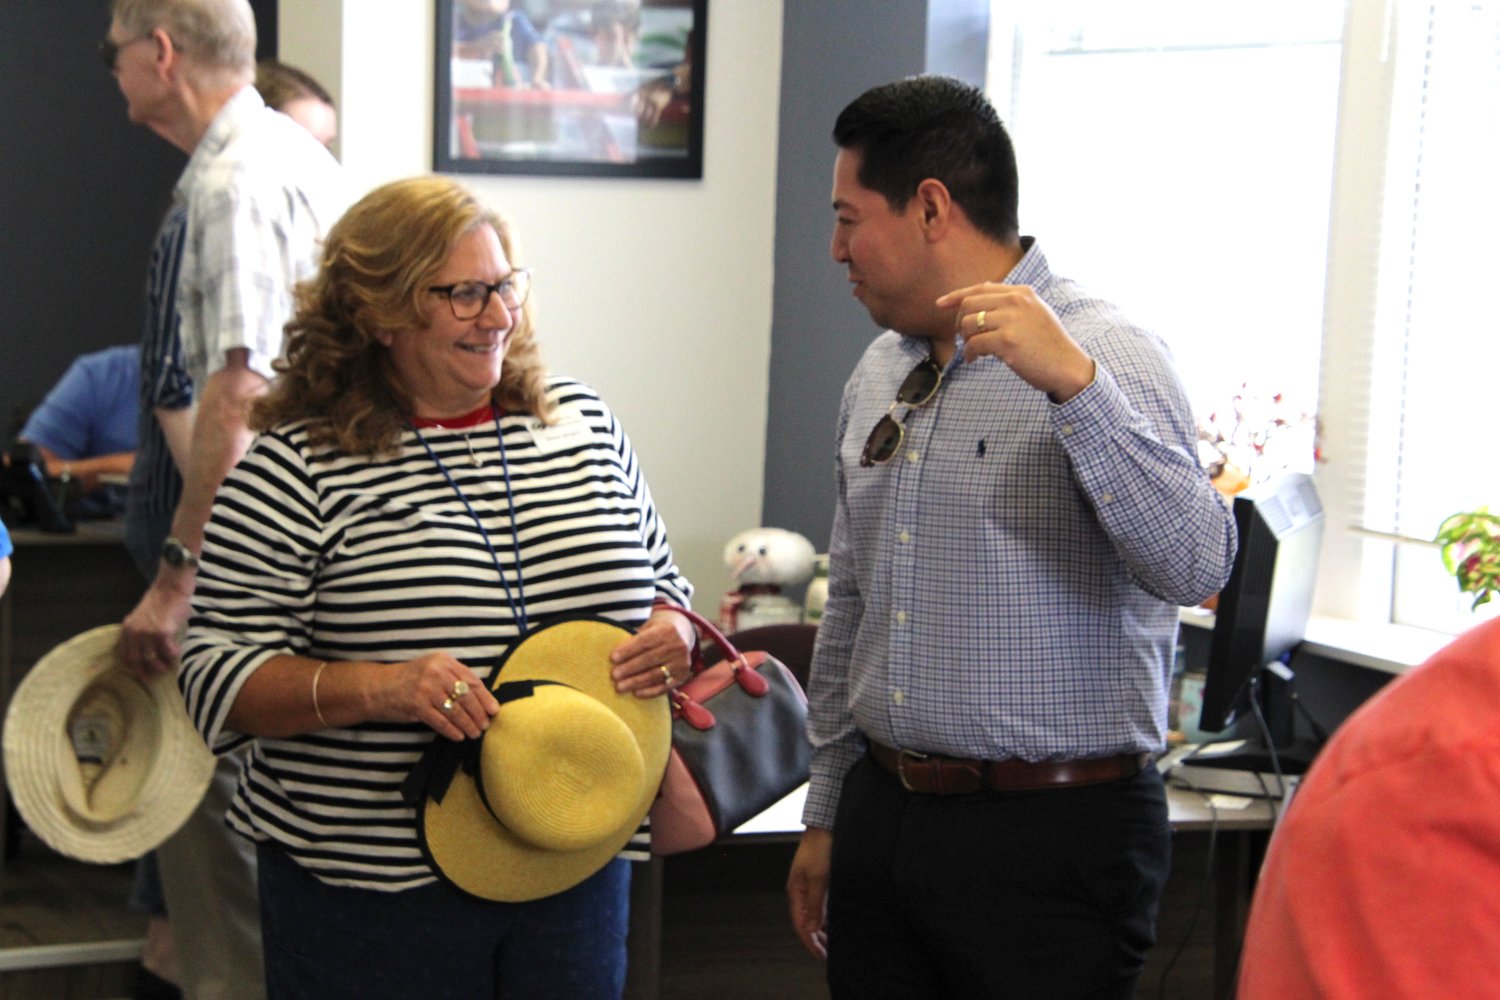 Center for Human Services Director of Development Susan Mergen and Pettis County Eastern Commissioner Israel Baeza talk during the Democrat’s open house on June 10.